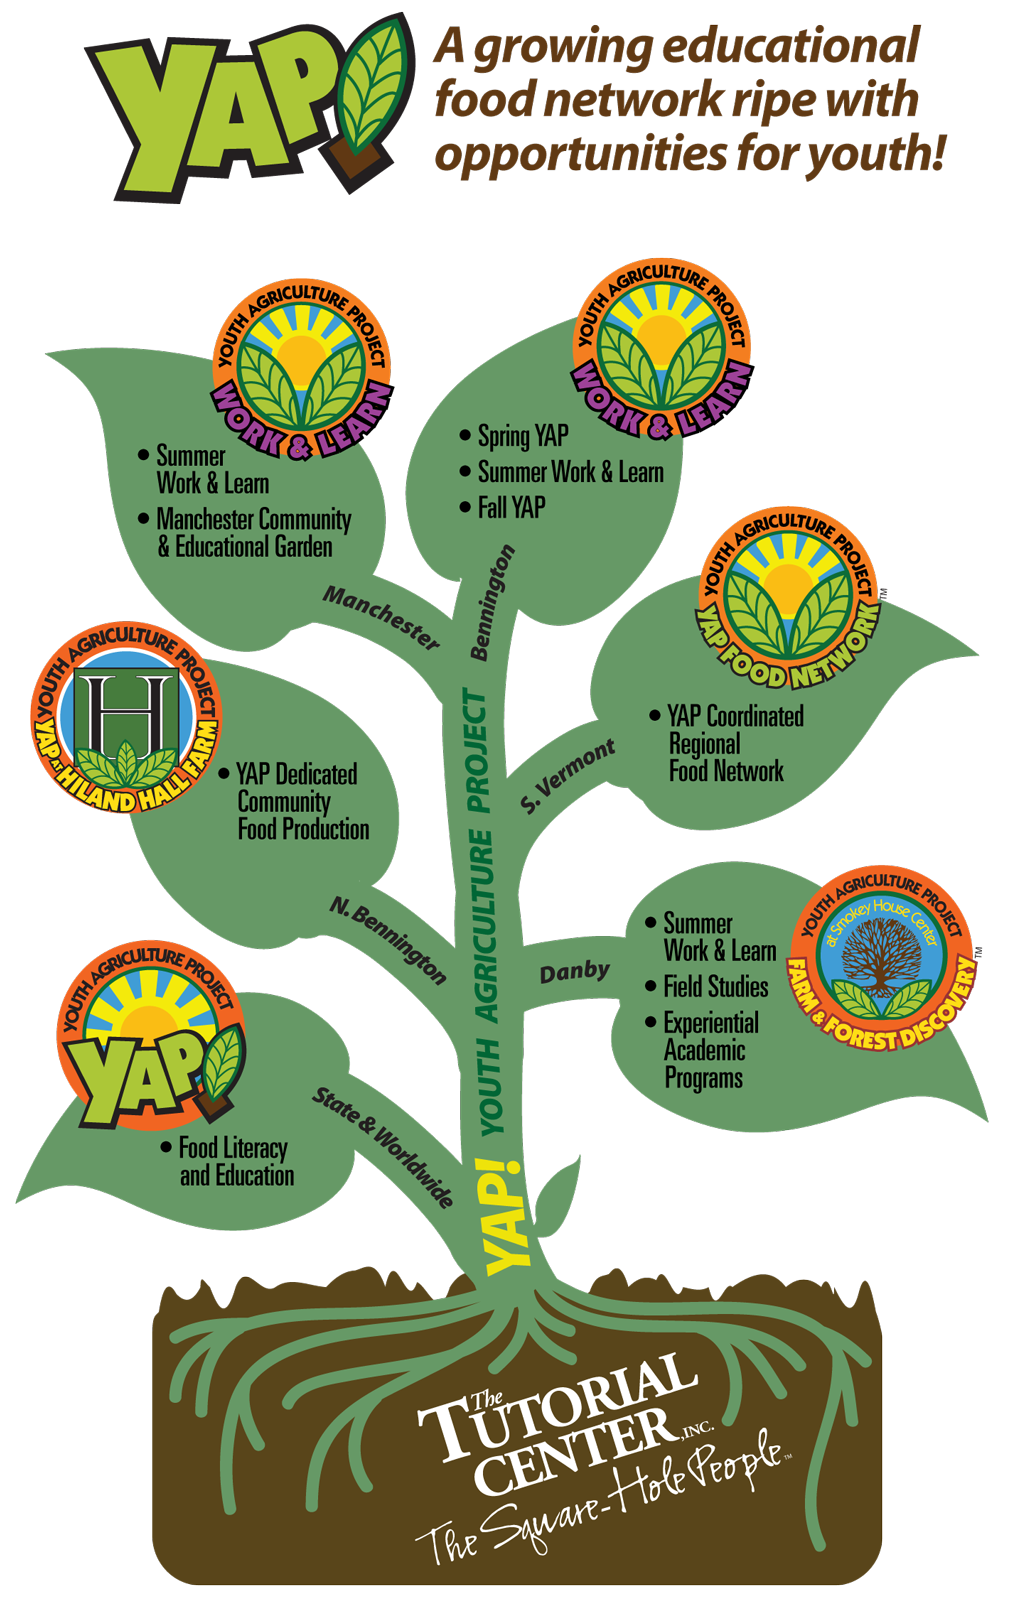 crops clipart agriculture